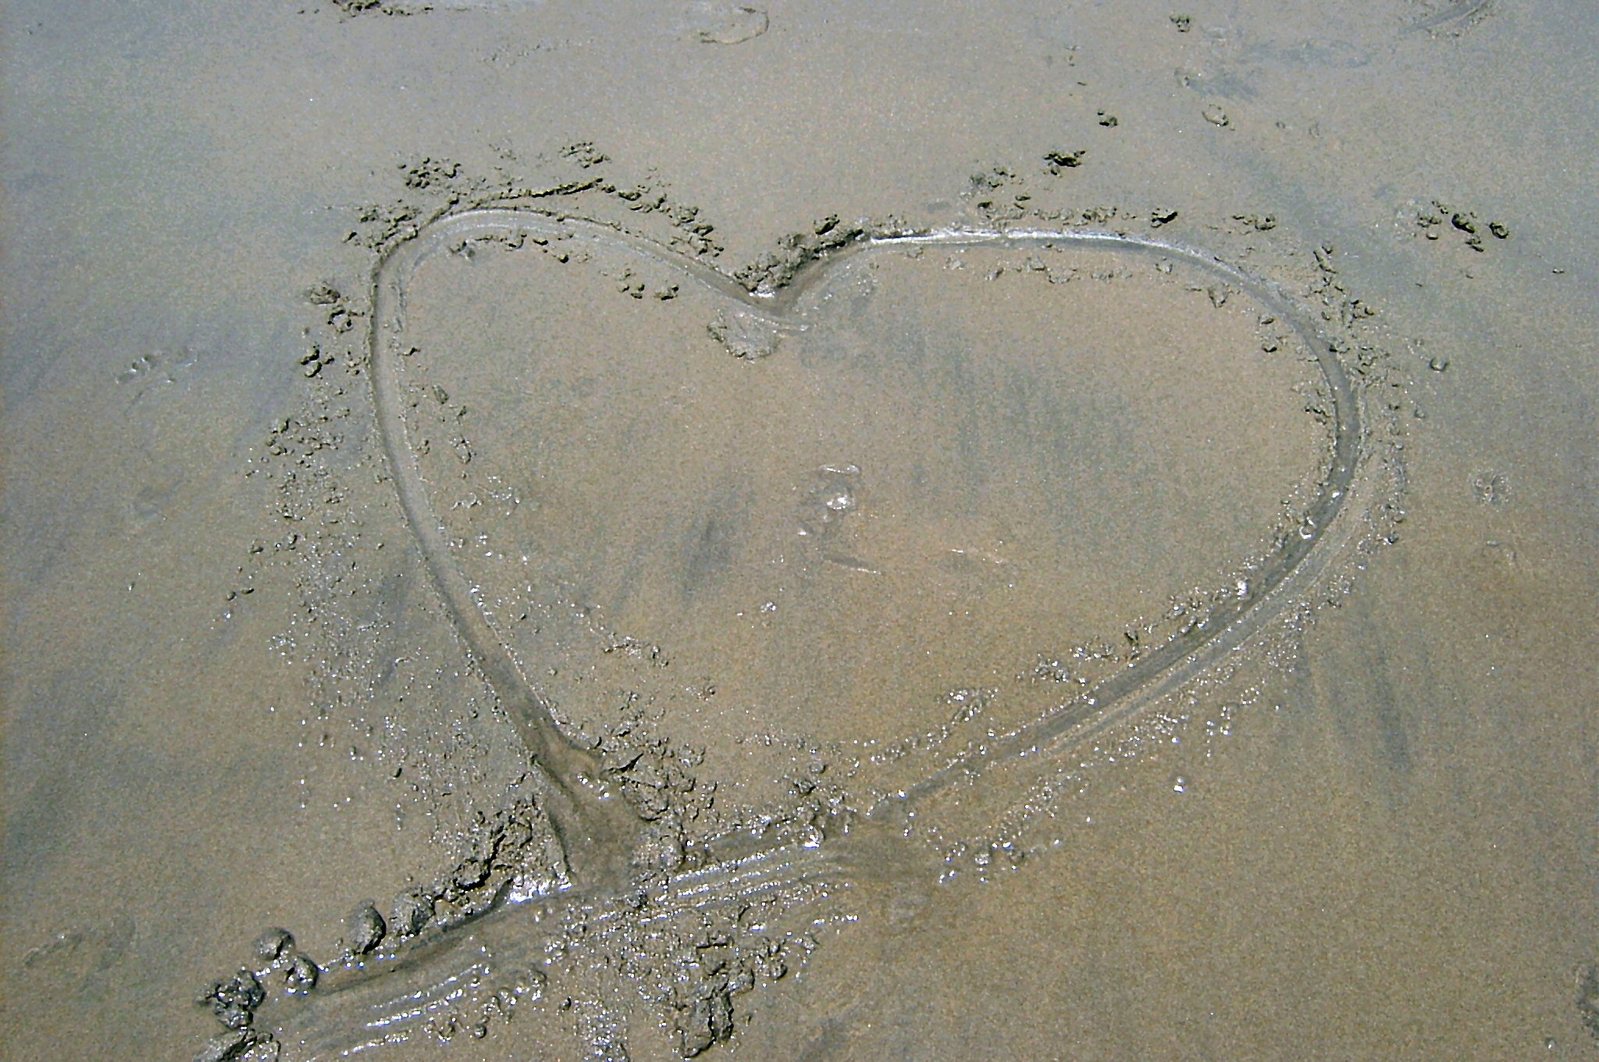 a heart - shaped heart is drawn in the sand at the beach